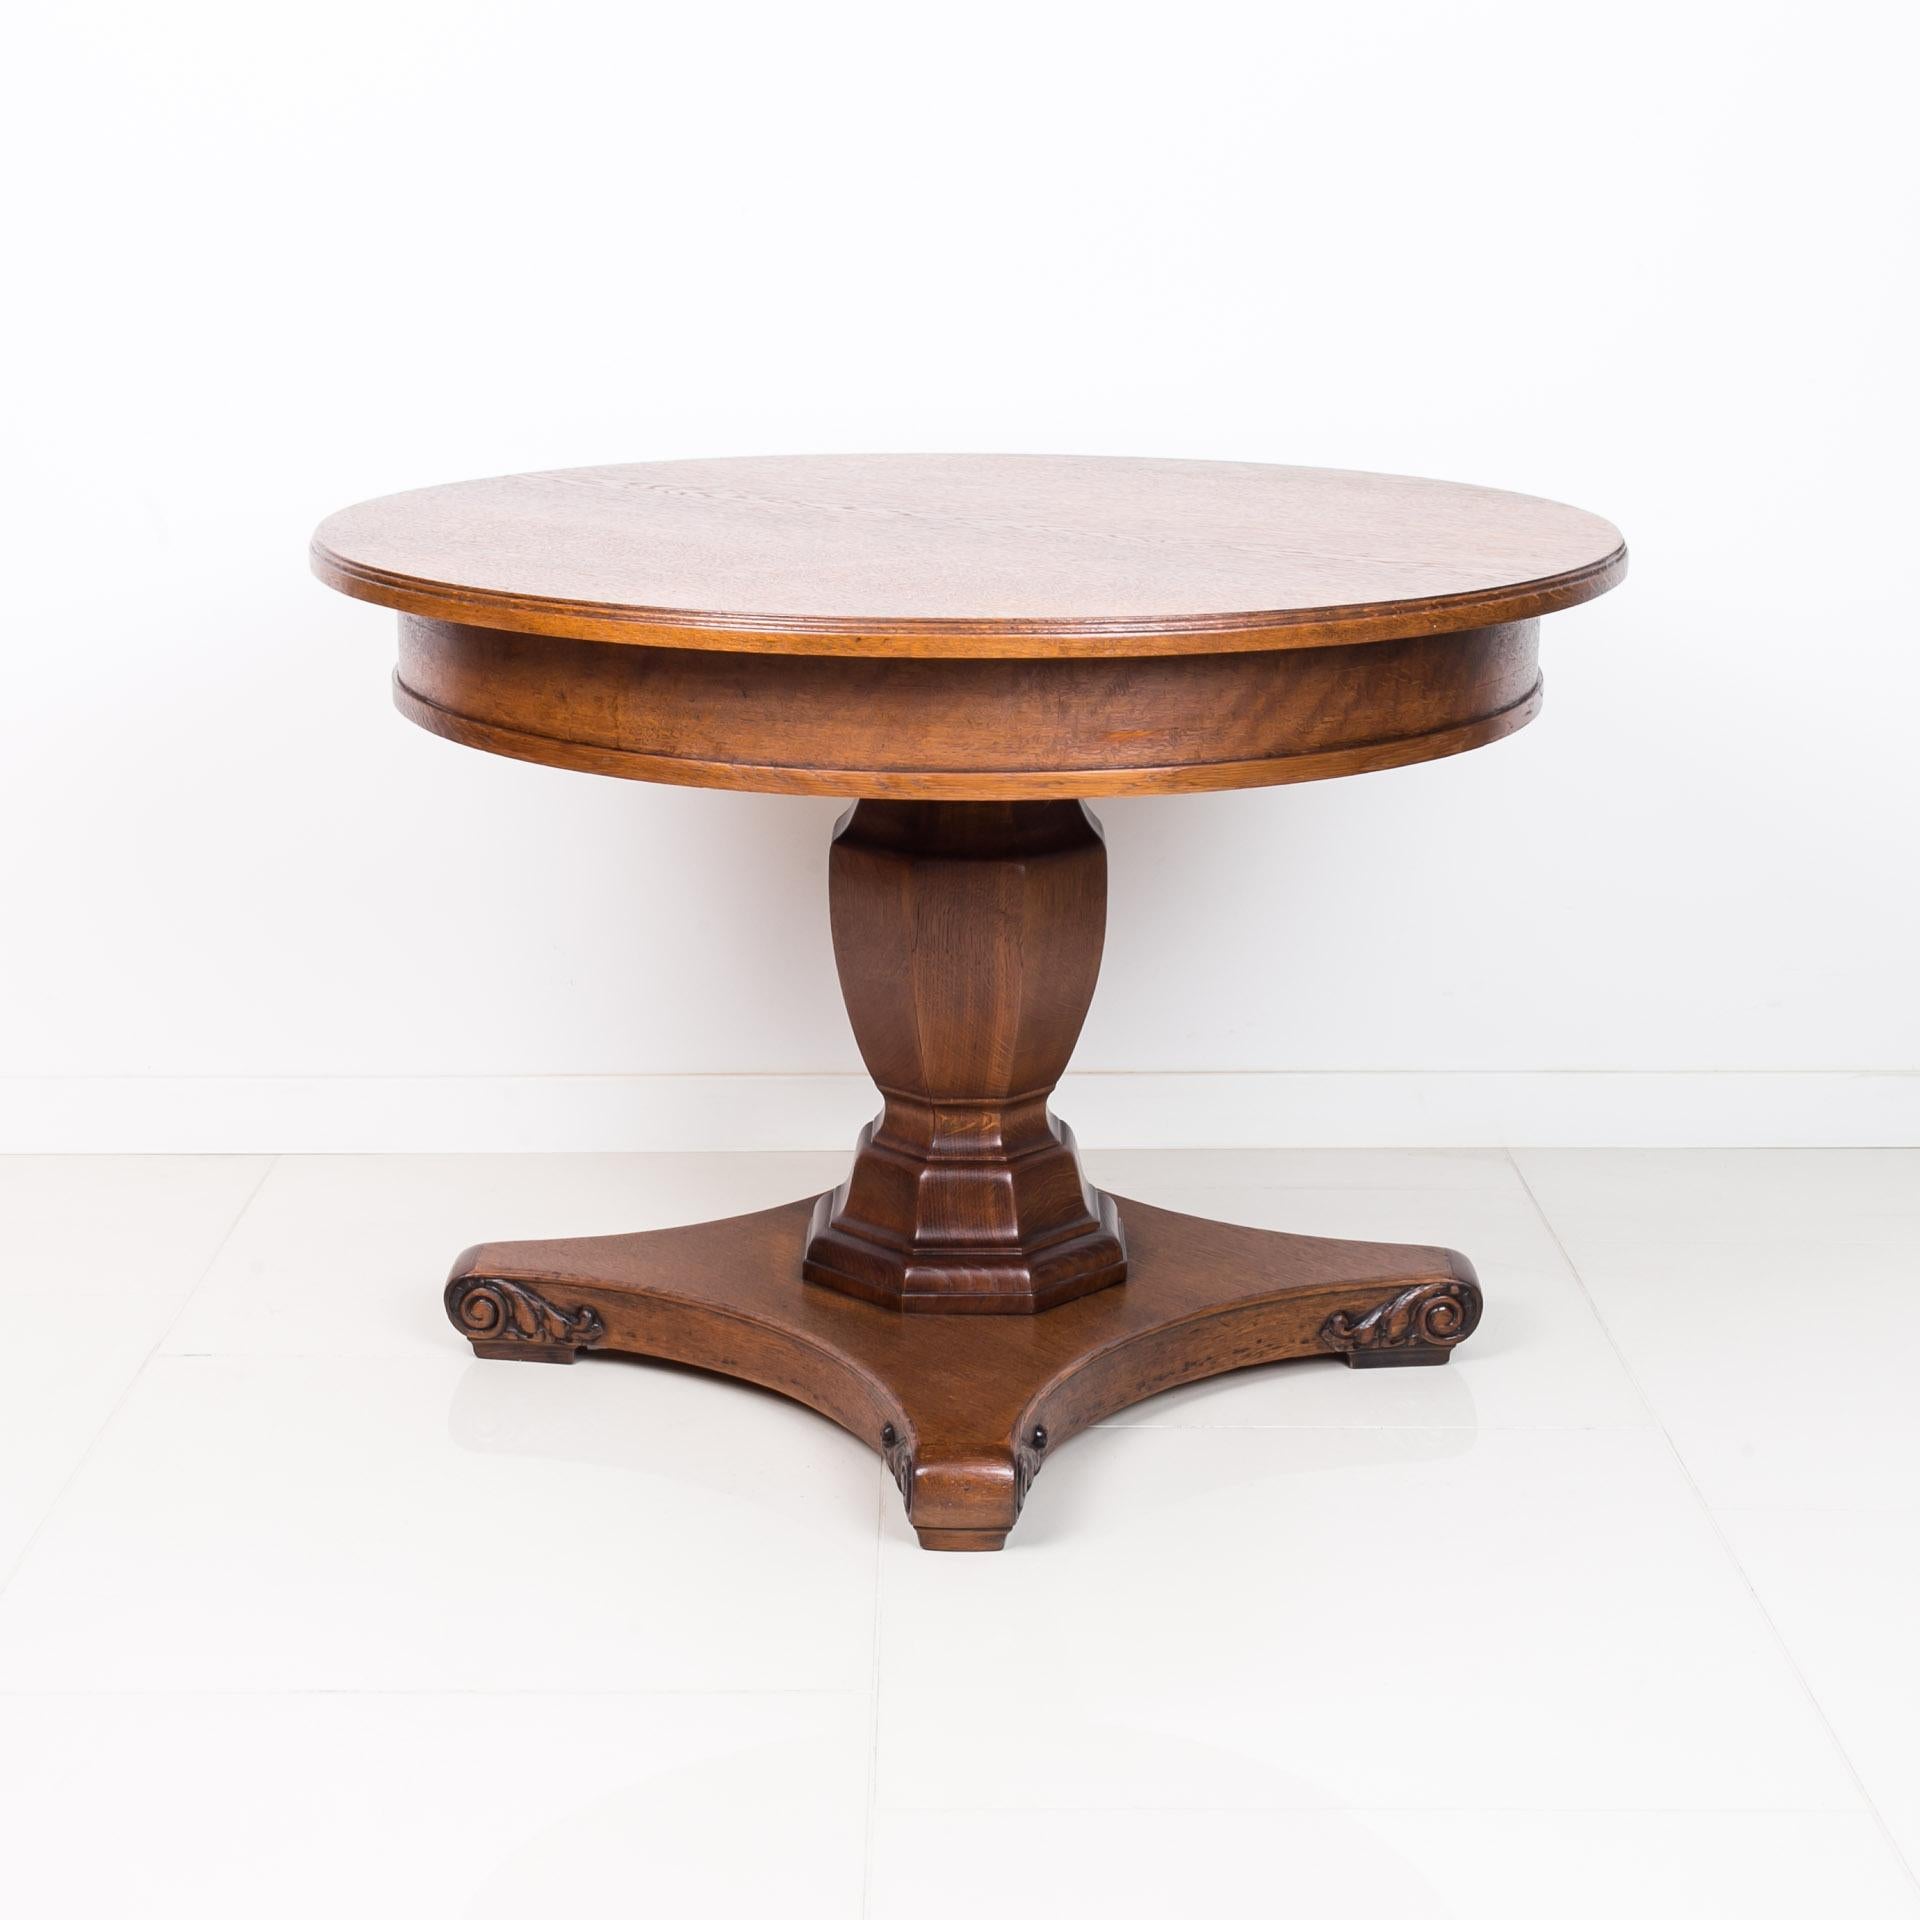 This Art Deco style round table was made around 1940s in Germany. It is made of oak wood. It has undergone professional renovation process in our workshop. We took care to preserve the natural colour of the wood, then the surface was protected with